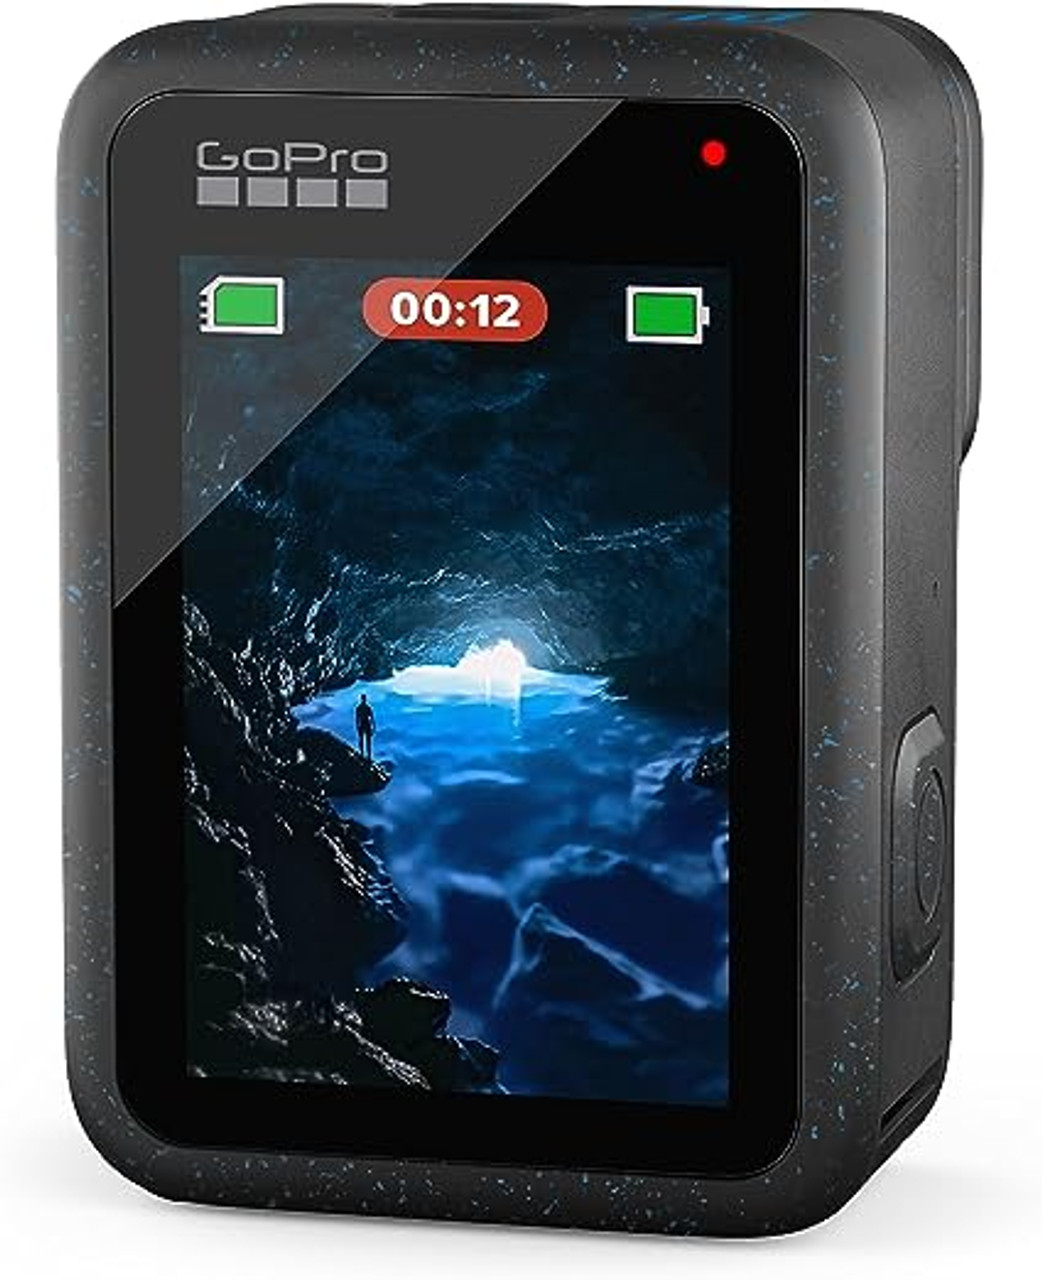 GoPro HERO12 Black - Camera HD 1/ 27MP Action 5.3K60 Waterproof Video, Photos, HDR, Ultra with